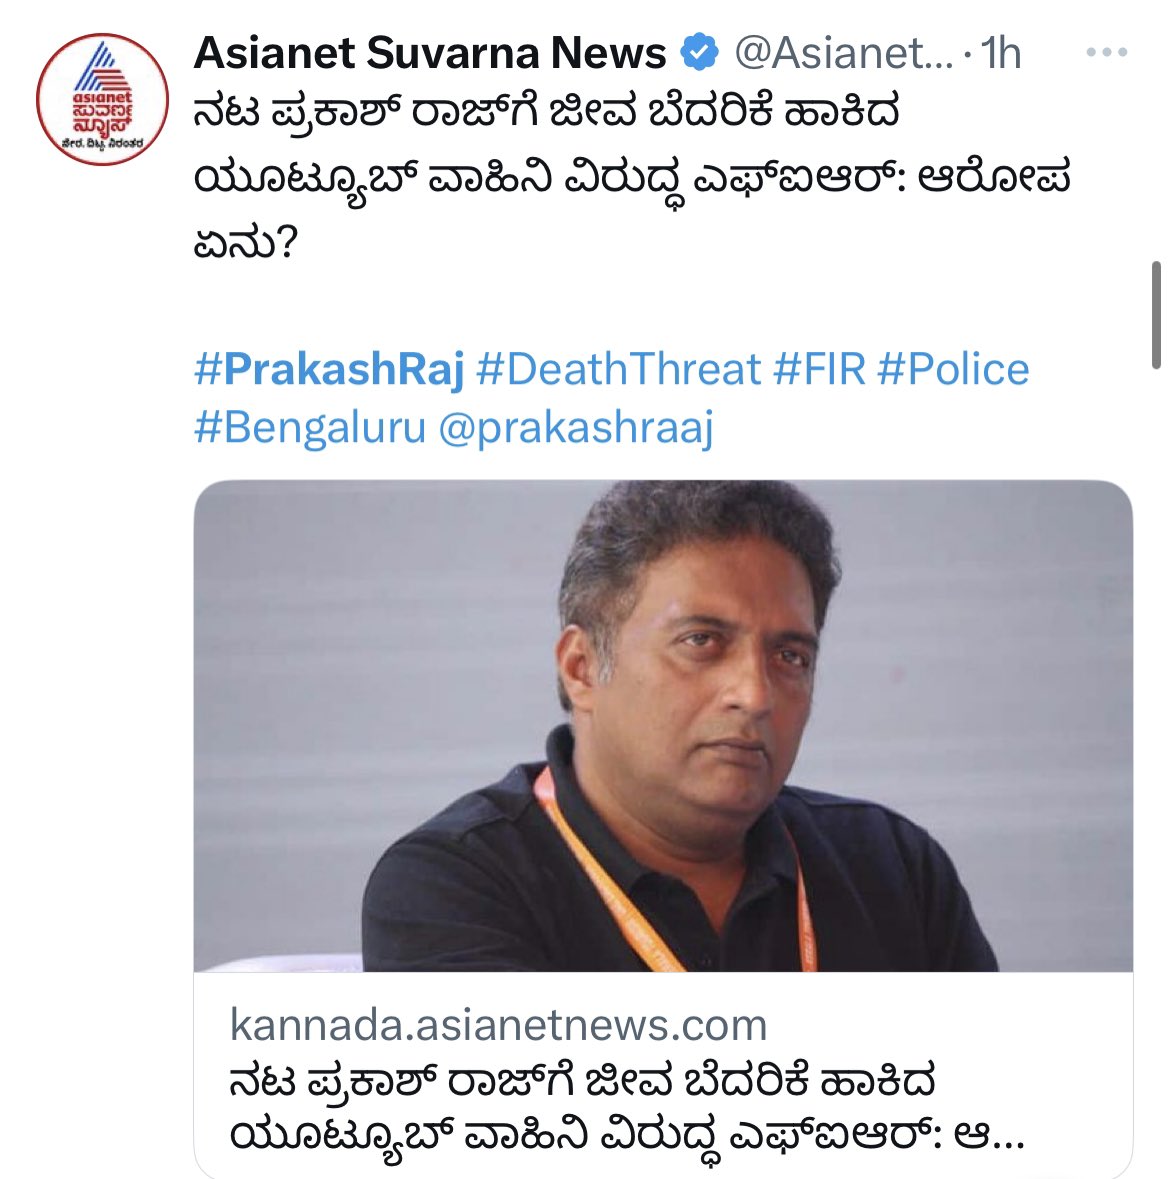 In last two days, two FIRs are filed against me

One by ex Congress corporator,
I said I'll fight for Soujanya (I have screenshot), but they said am against her

Another by actor Prakash Raj,
I asked to boycott him for his anti-India stand, but he said am giving him death threat